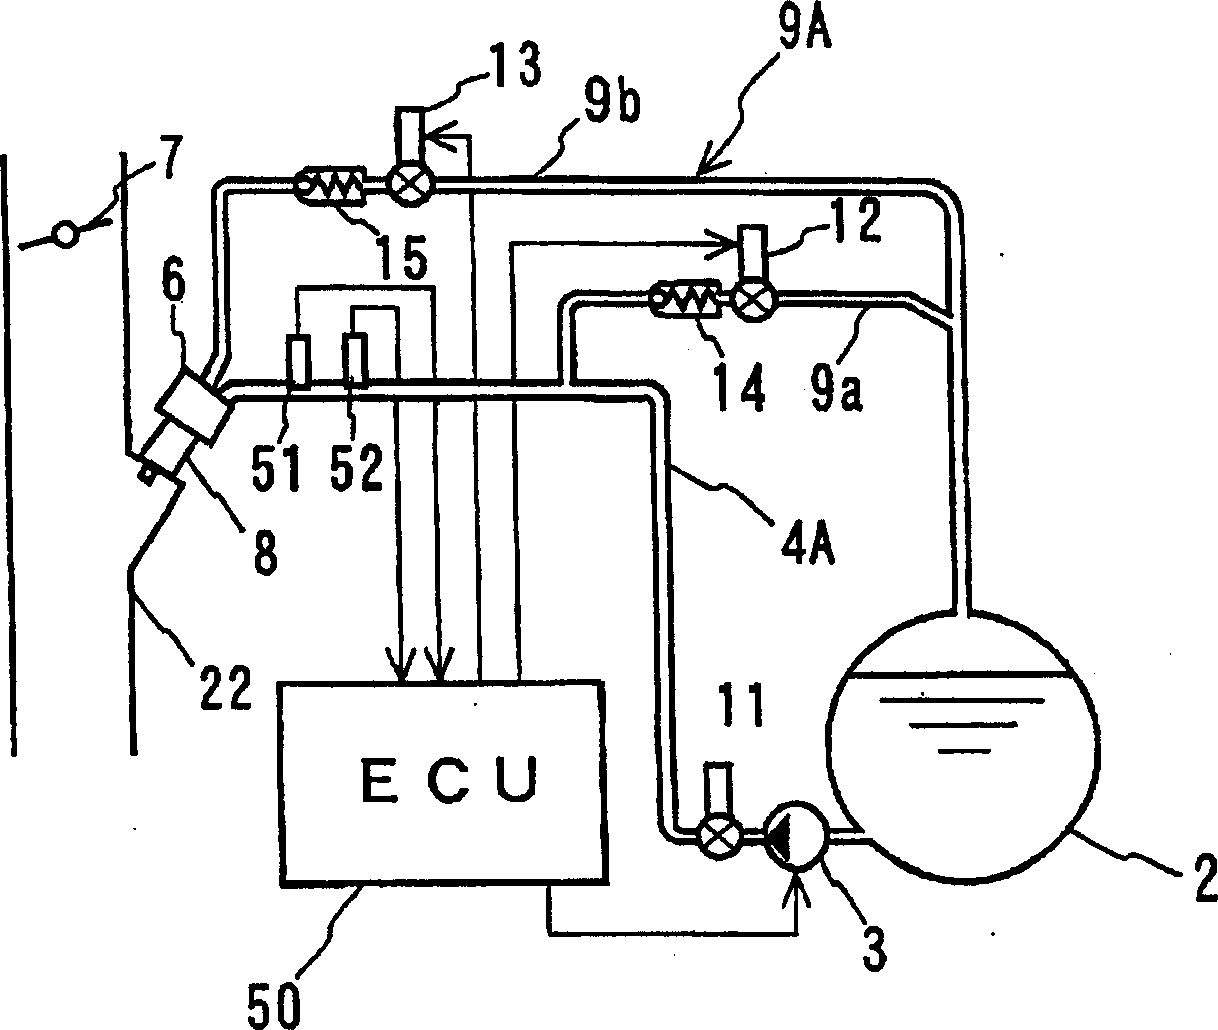 Engine fuel feed device